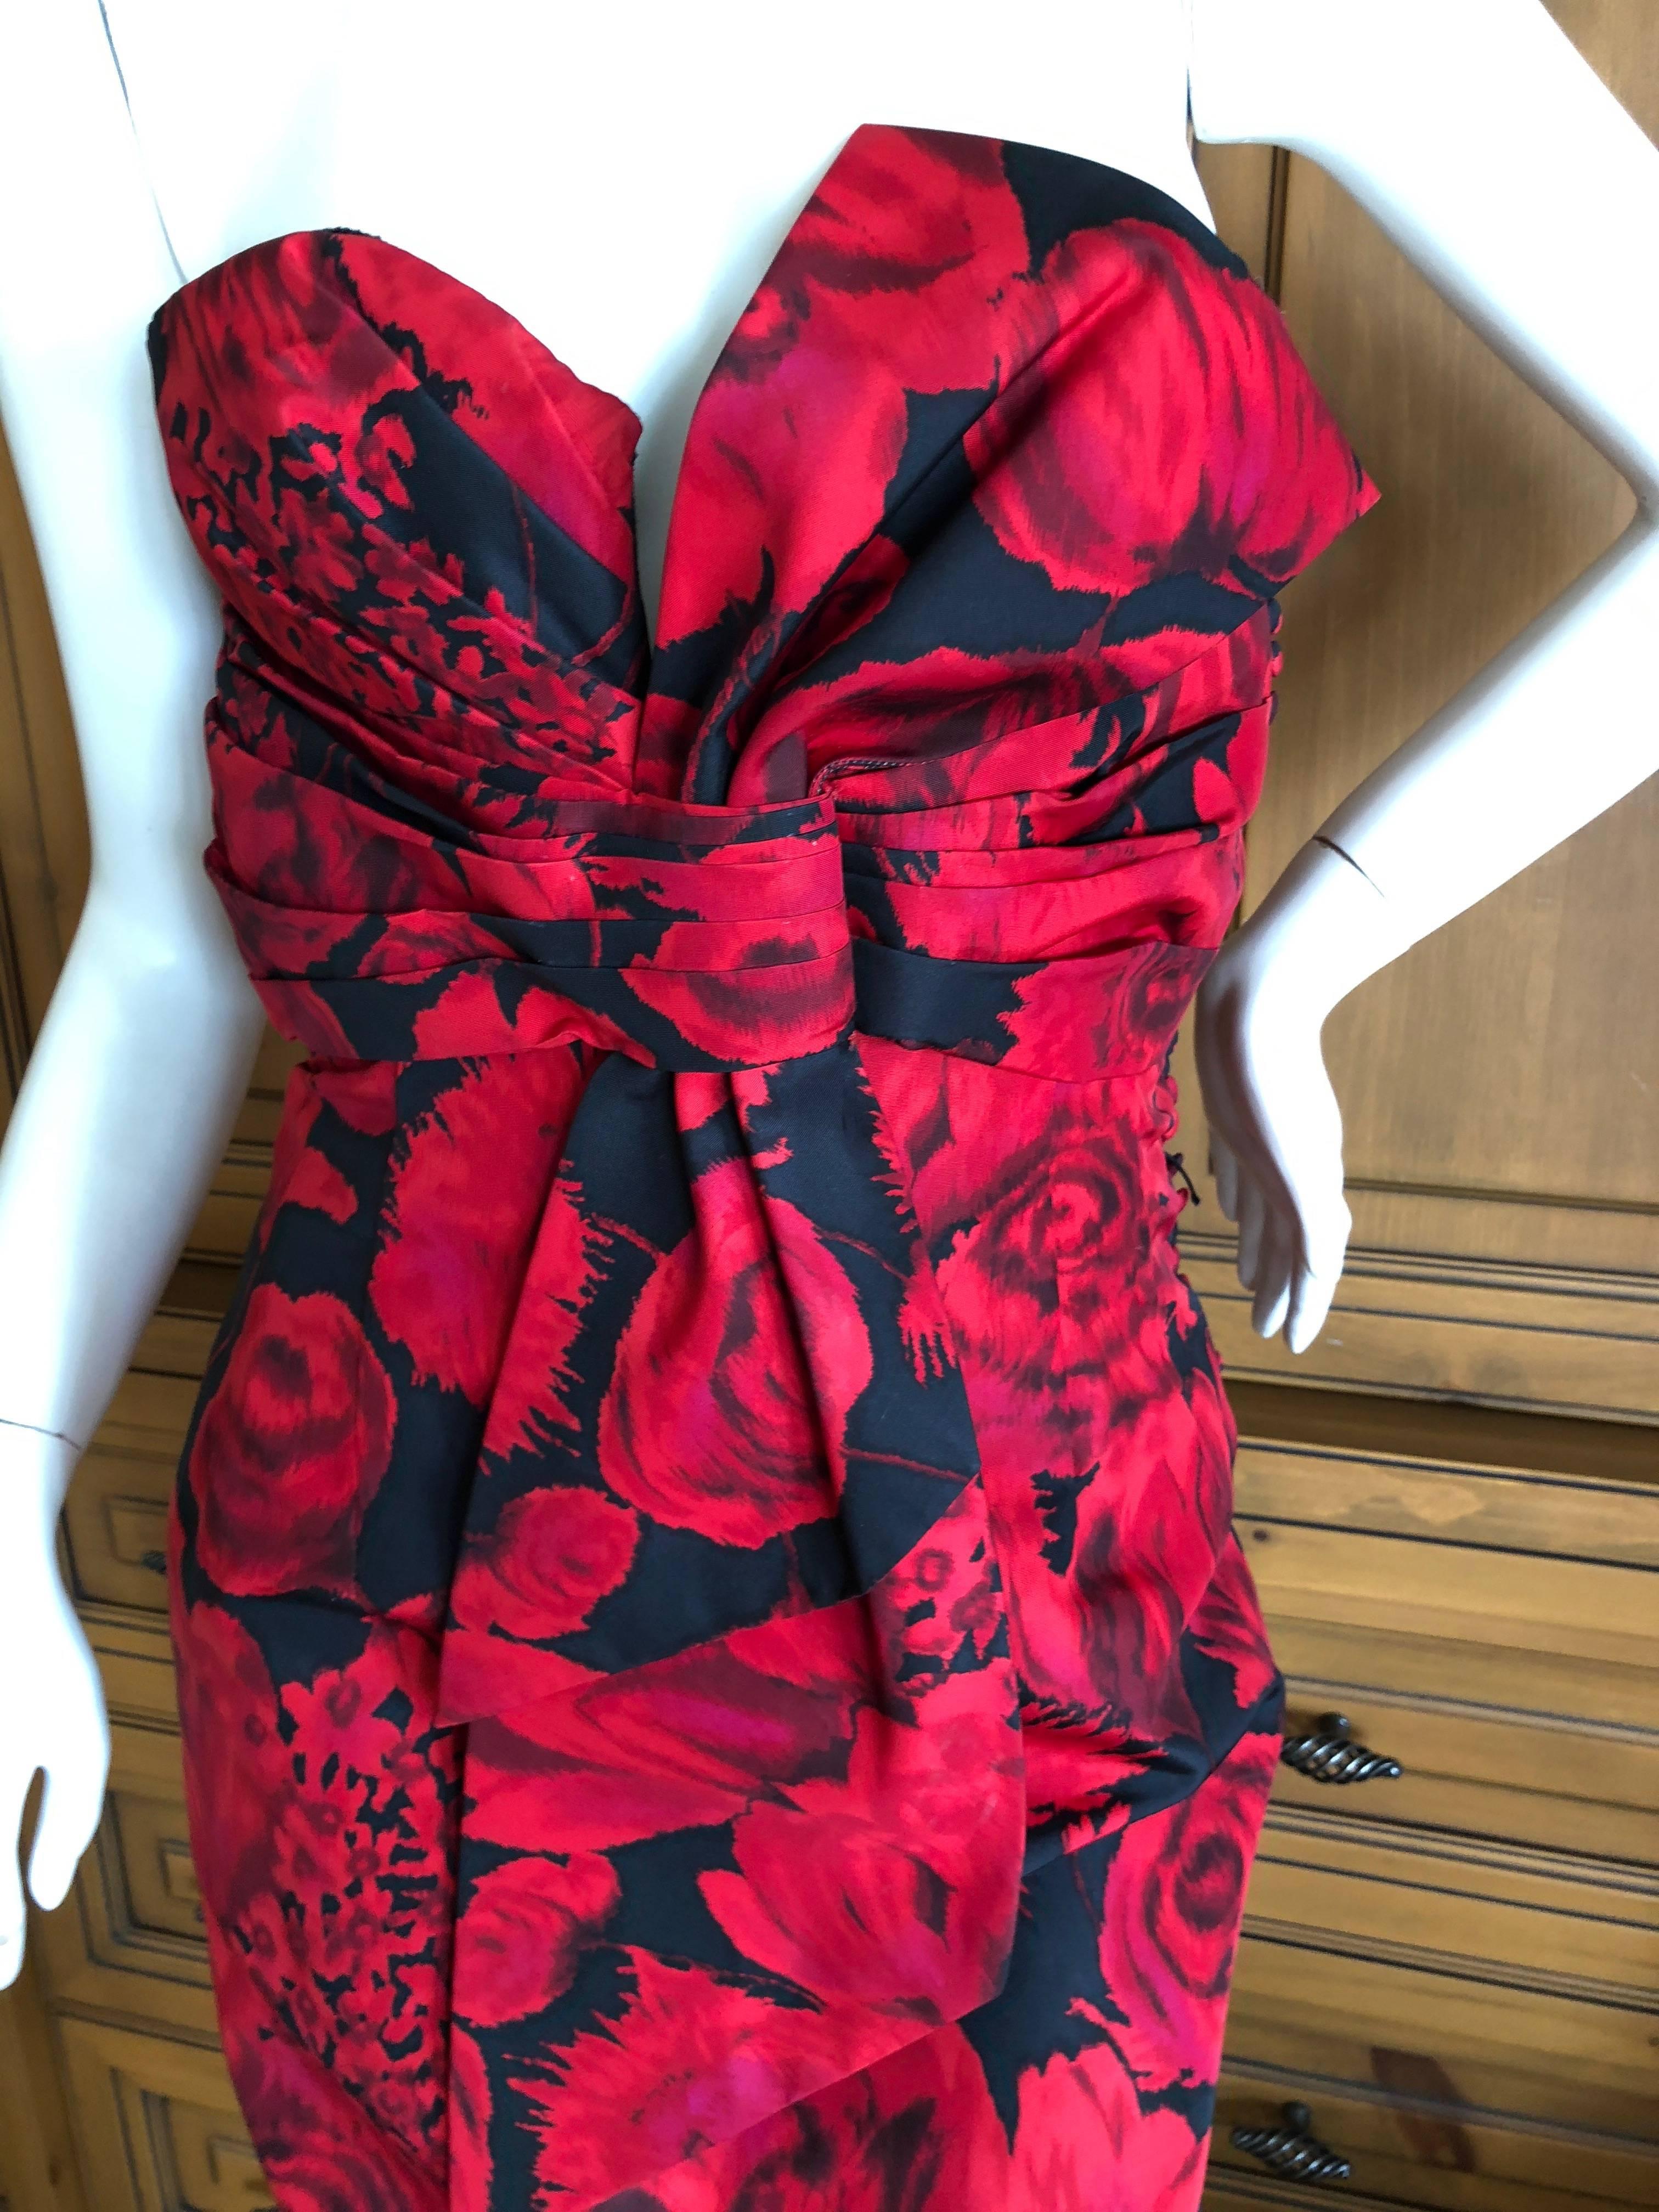 Christian Dior by John Galliano Red Floral Strapless Dress, Pre Fall 2009  In Excellent Condition For Sale In Cloverdale, CA